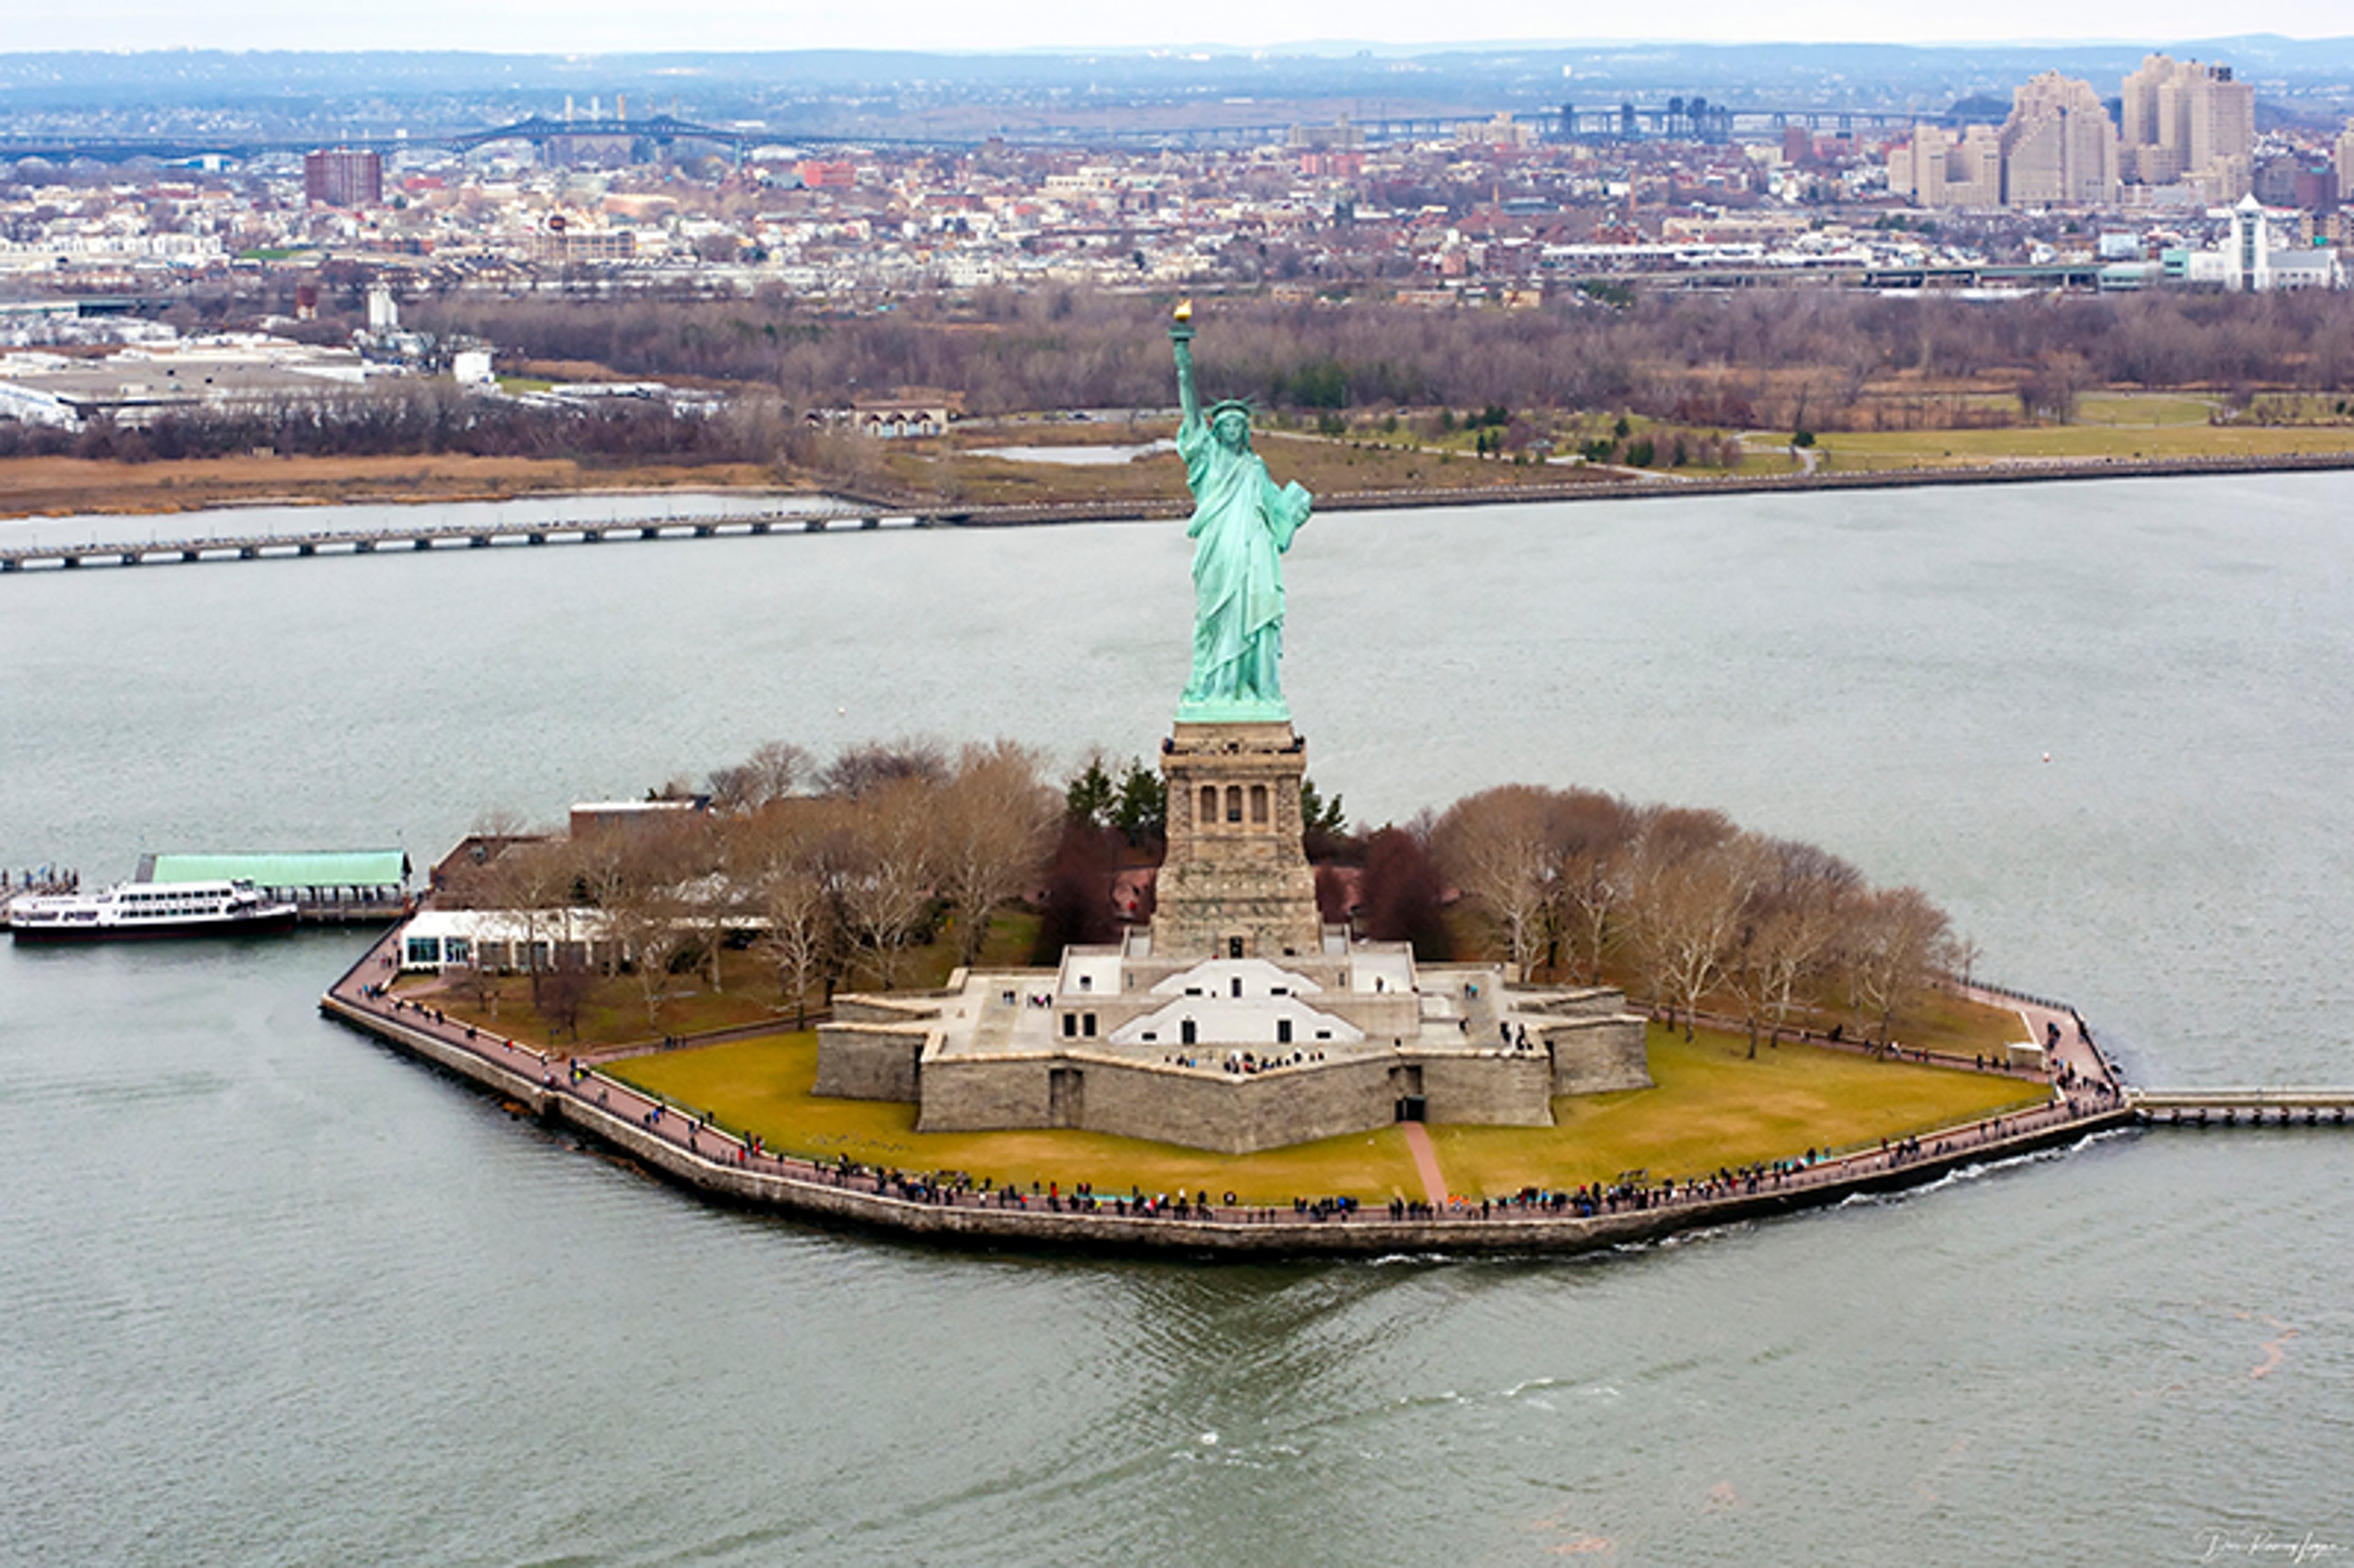 Ticket Purchases for the Statue of Liberty (A Visitors Guide)